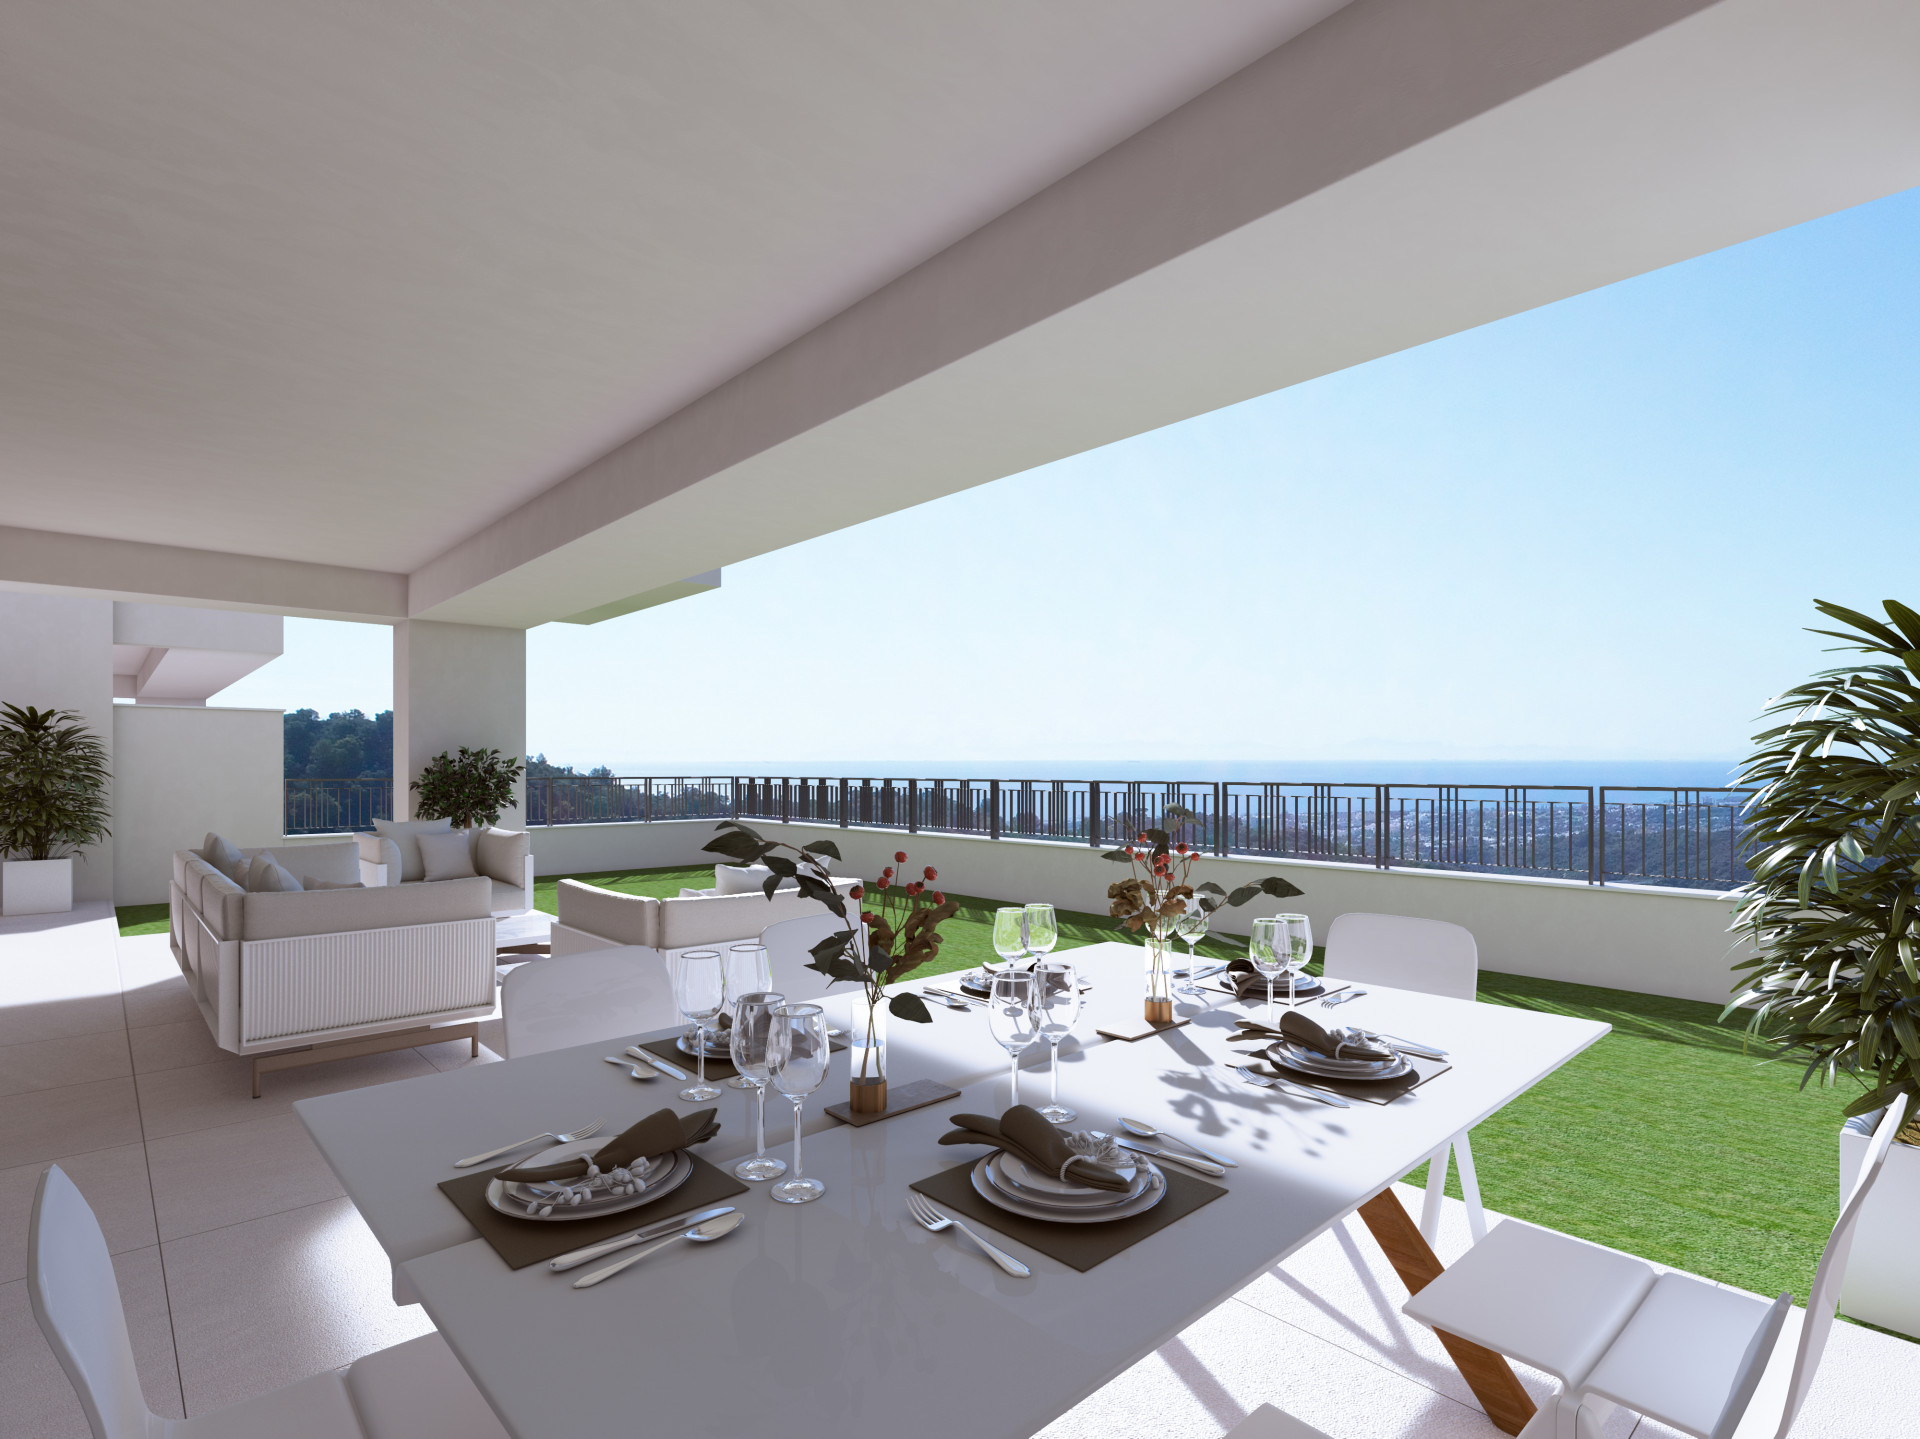 Almazara Hills: Apartments and Penthouses surrounded by nature and close to Marbella | Image 11